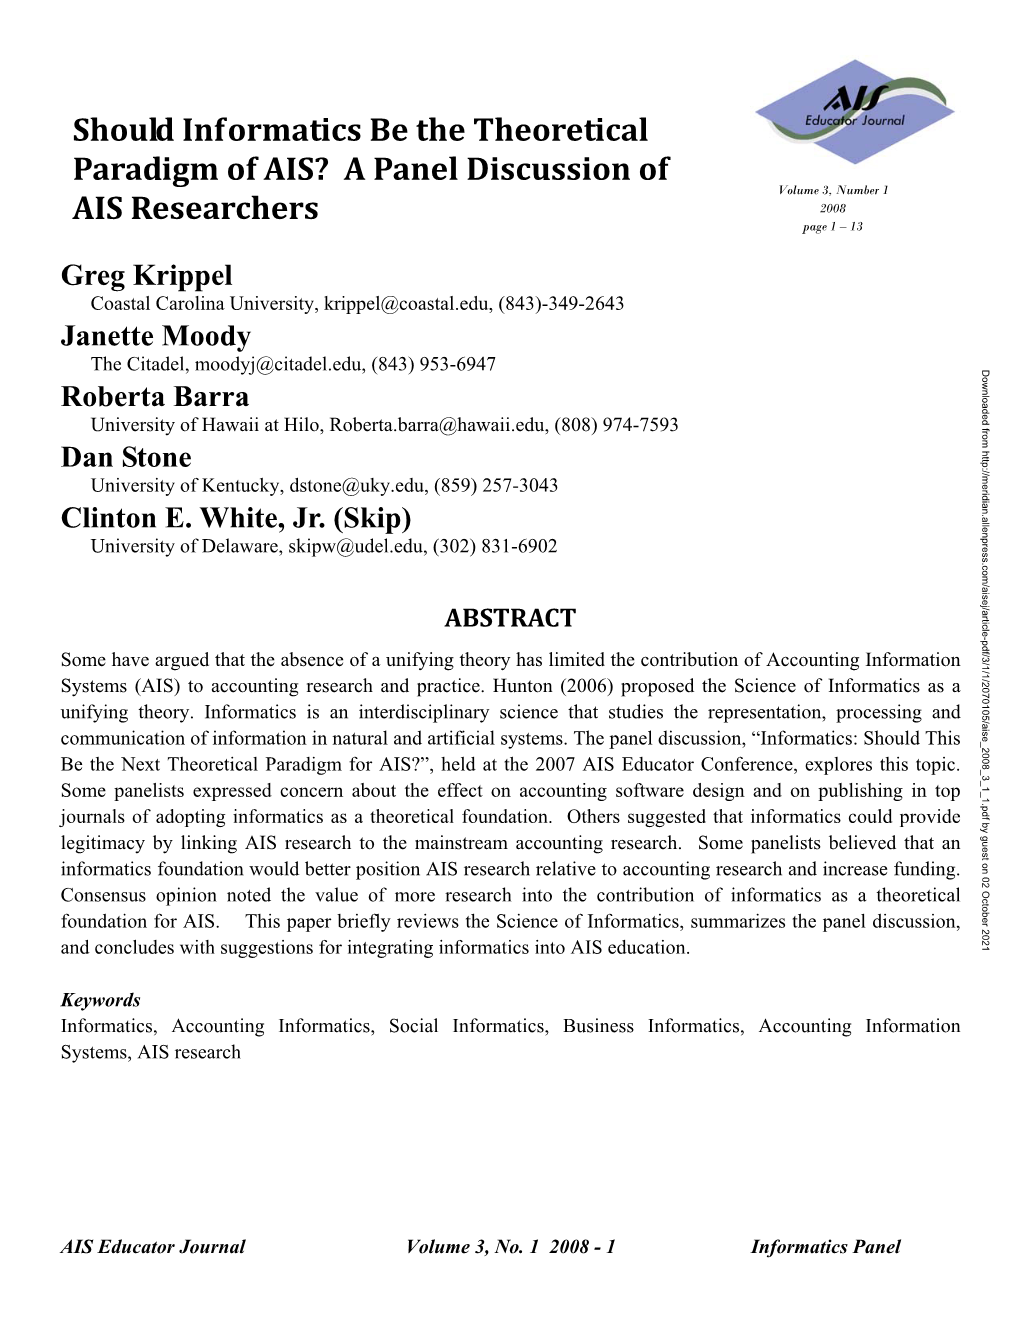 A Panel Discussion of AIS Researchers